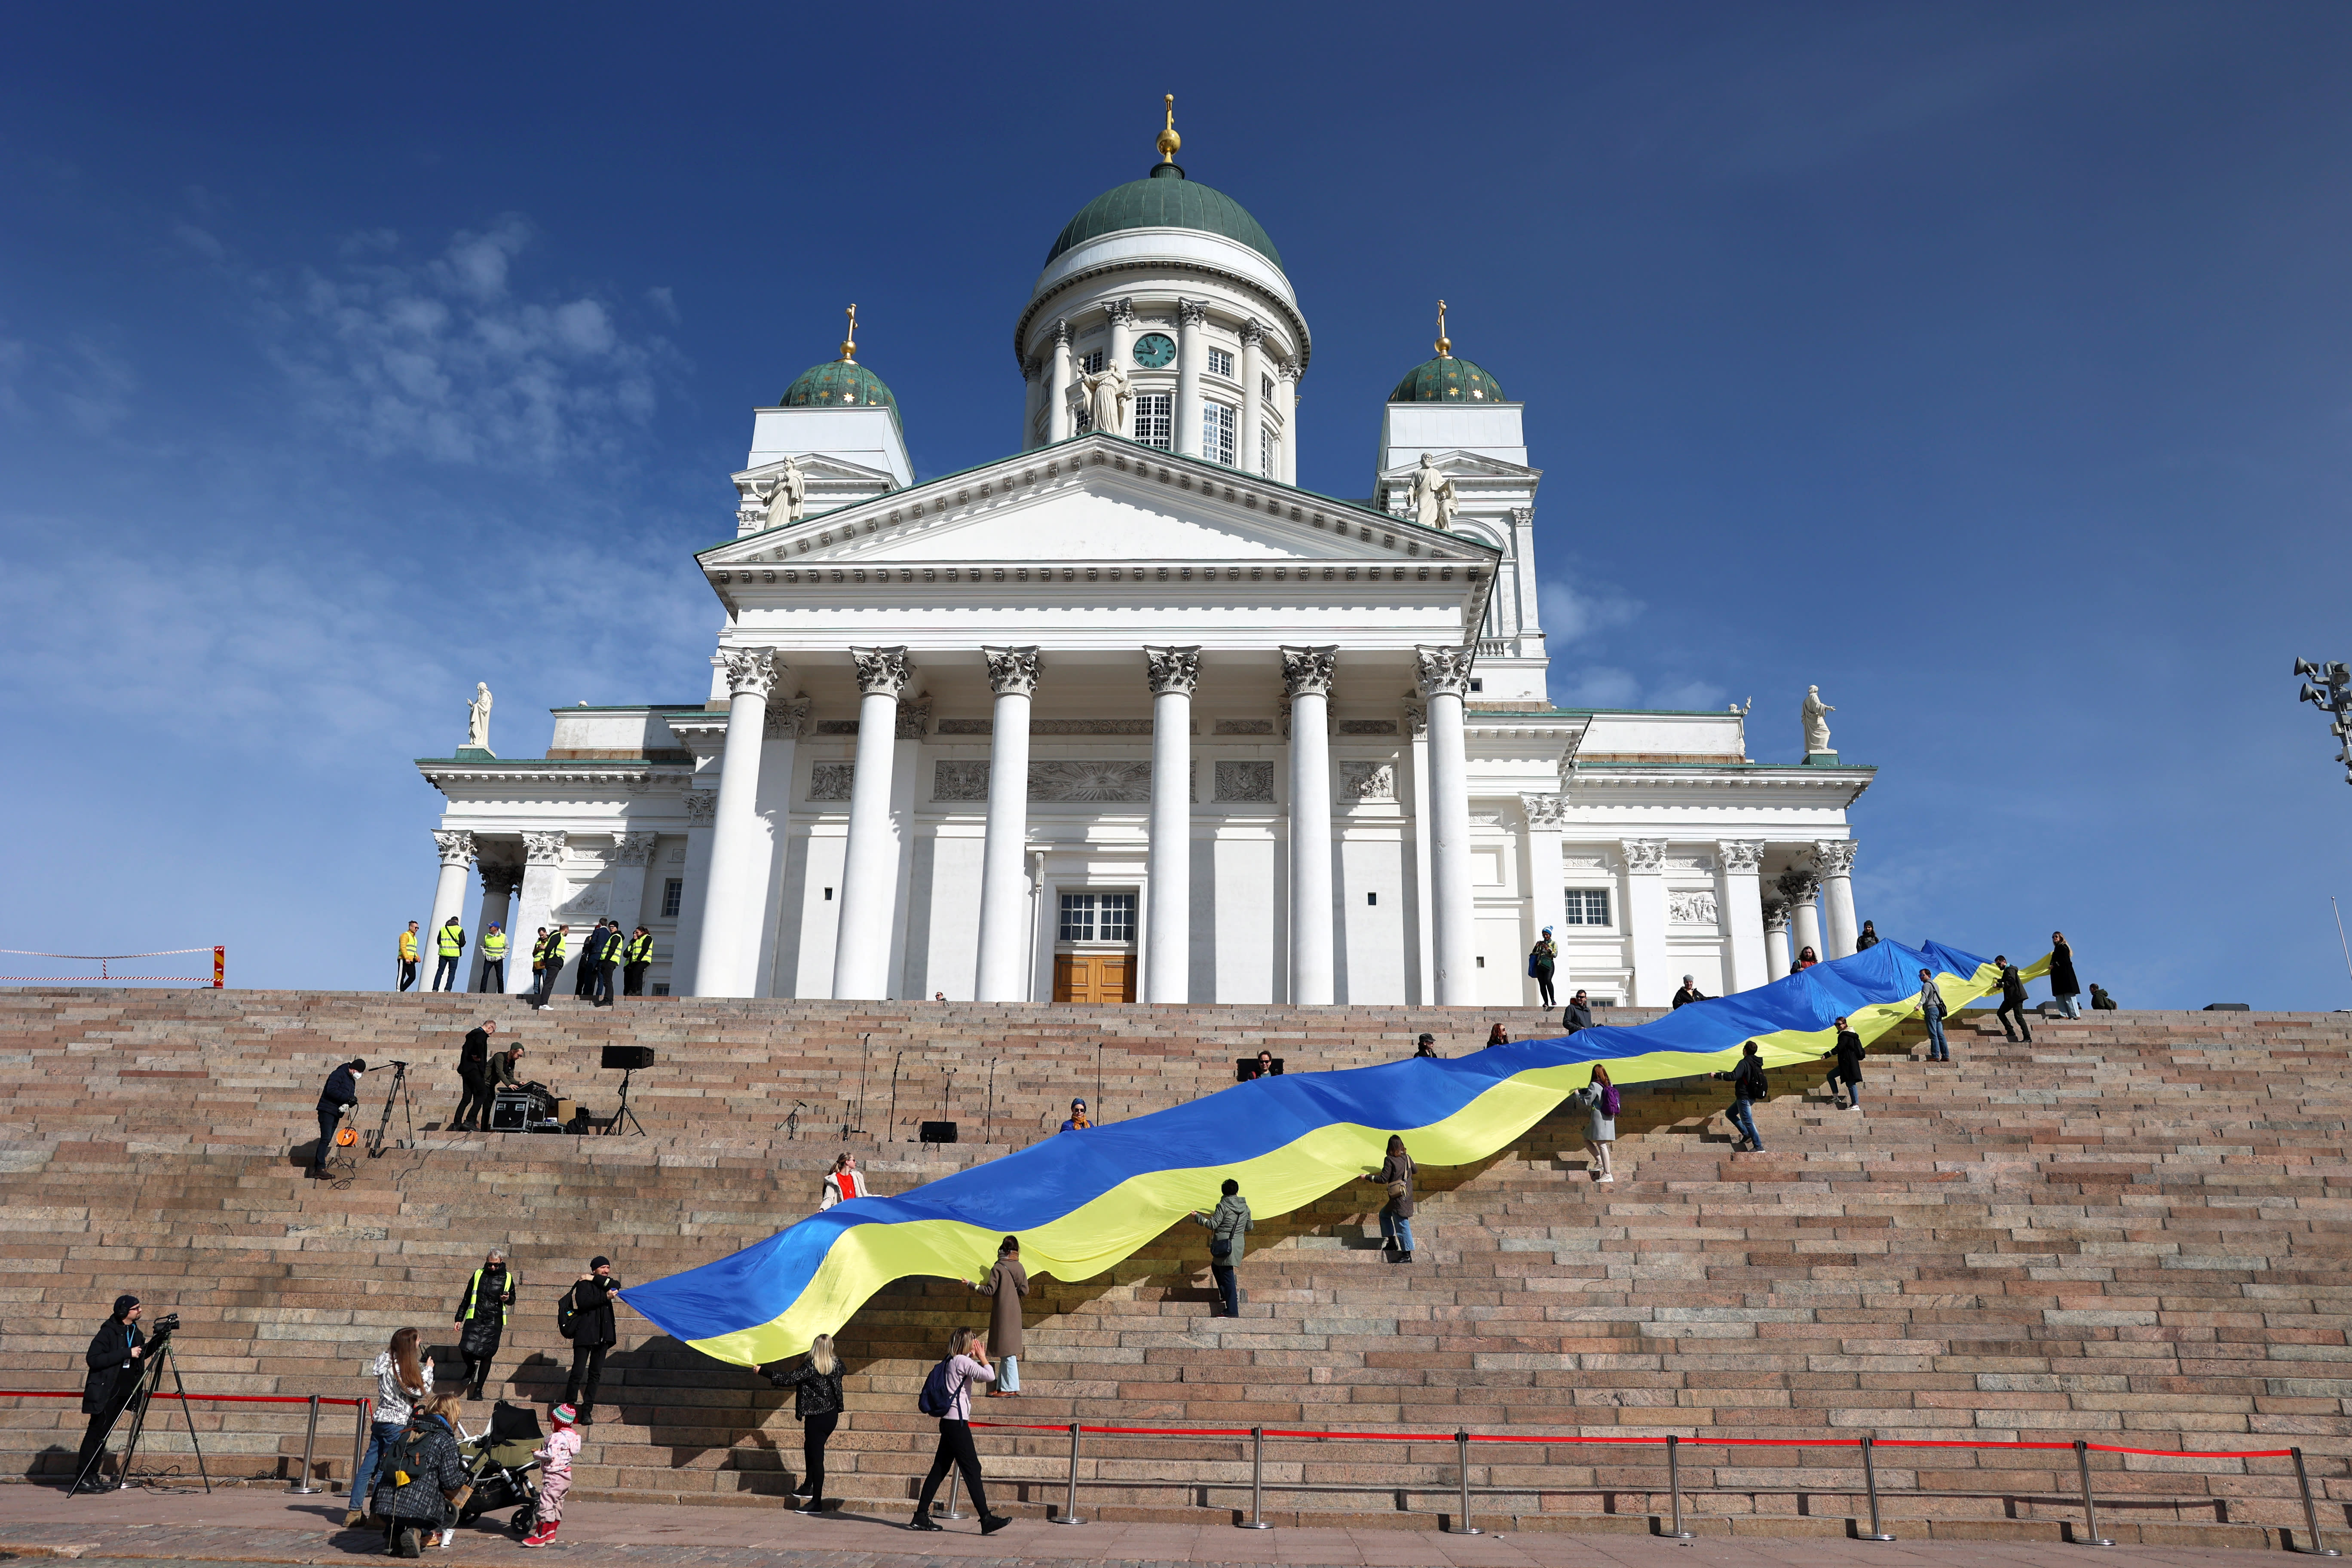 Finland will sail under the Ukrainian flag on Friday, which is the first year of the war